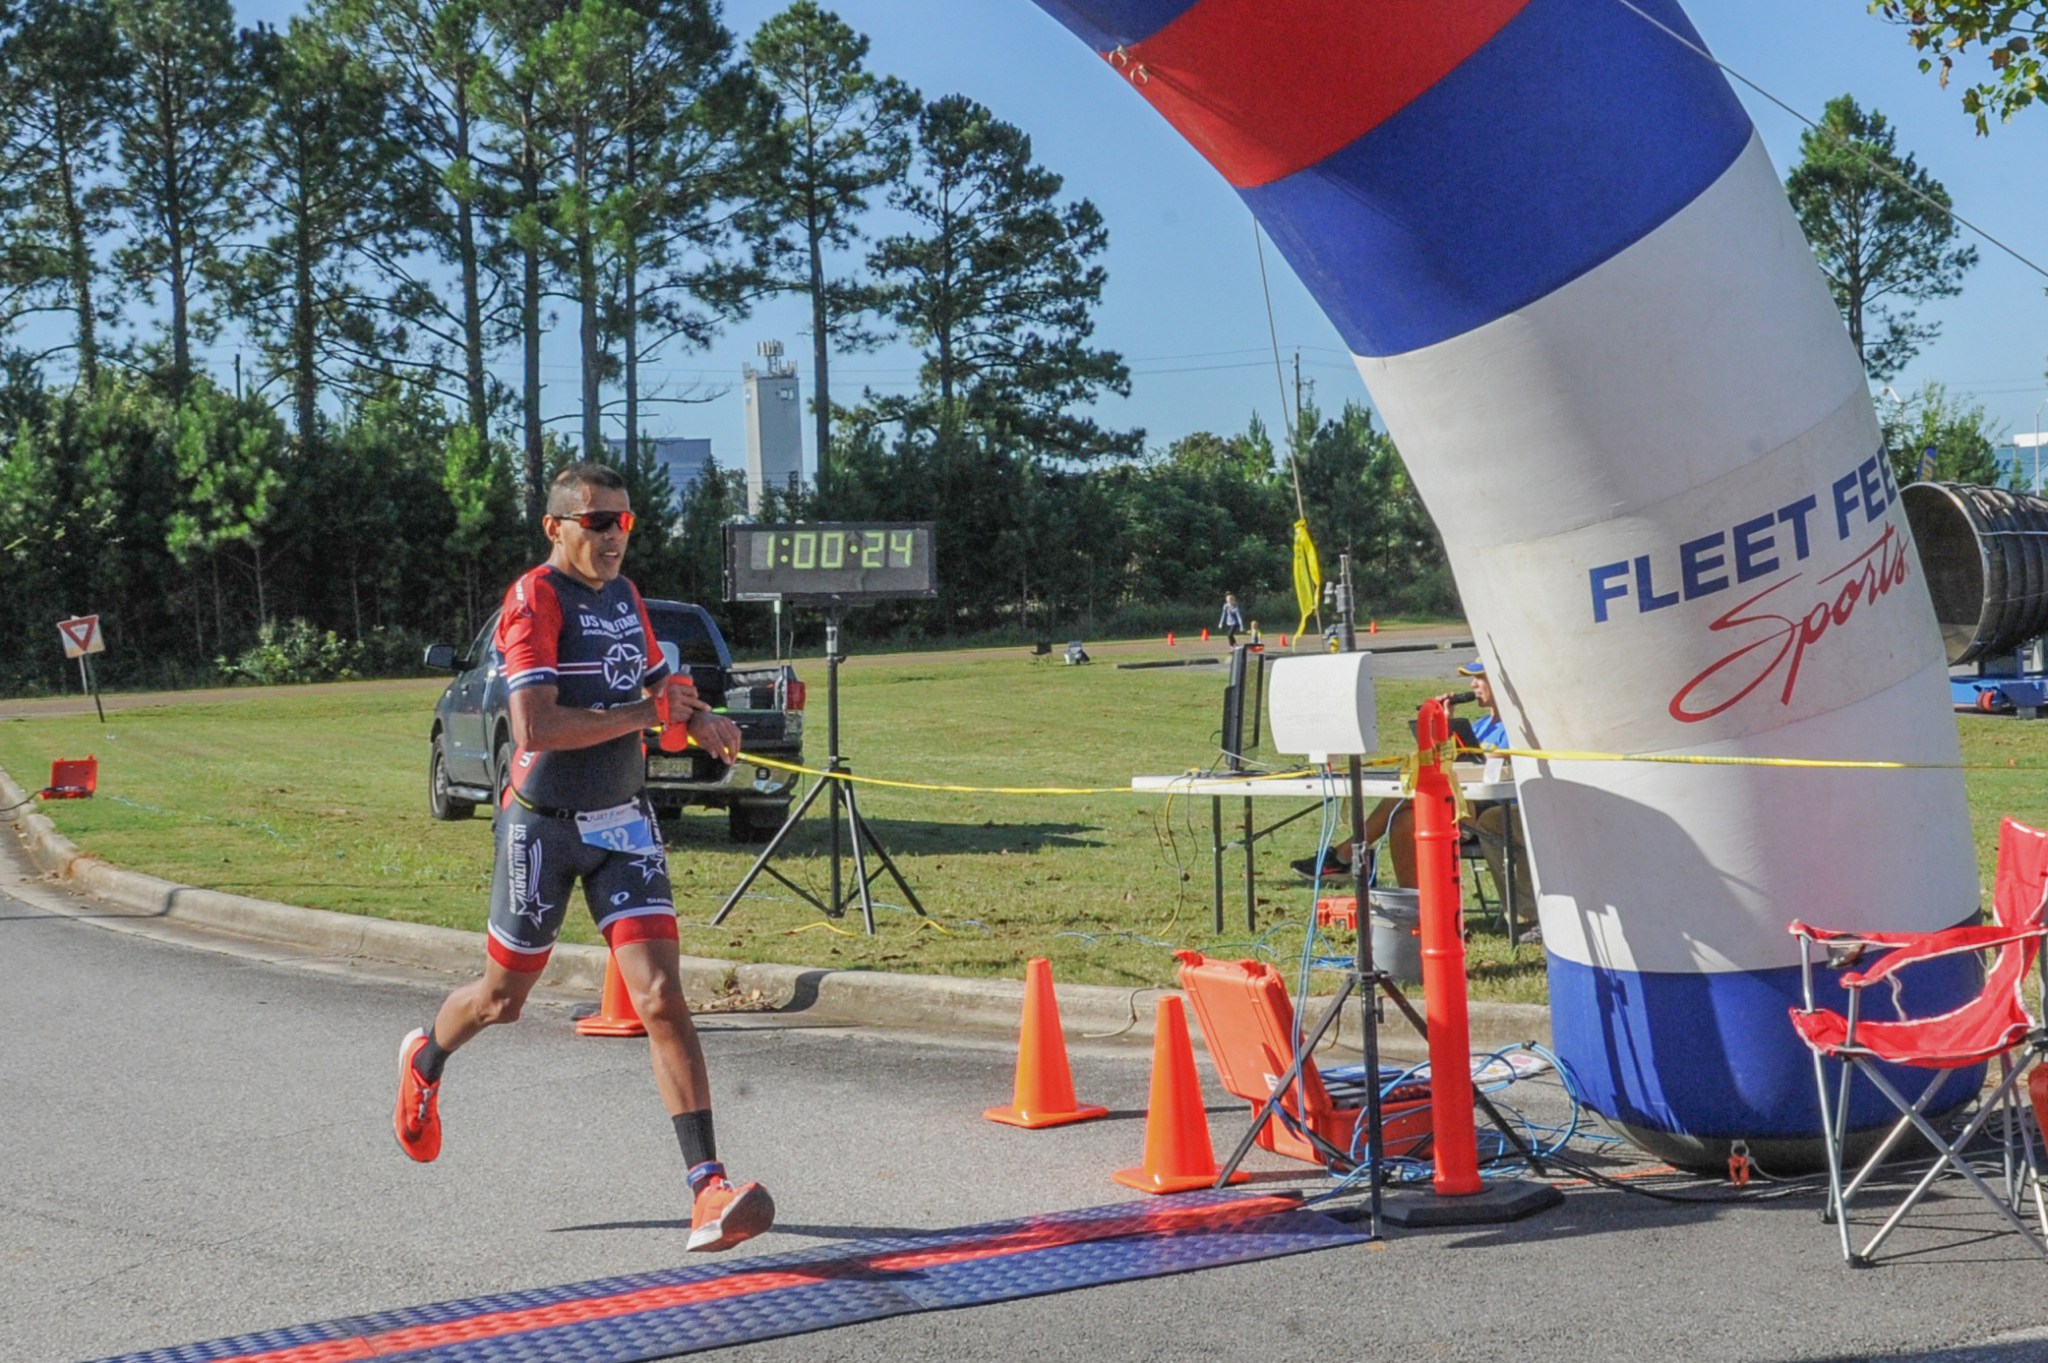 Miguel Contreras of Huntsville crosses the finish line at 1 hour, 23 seconds, to win the 2021 Racin’ the Station duathlon.